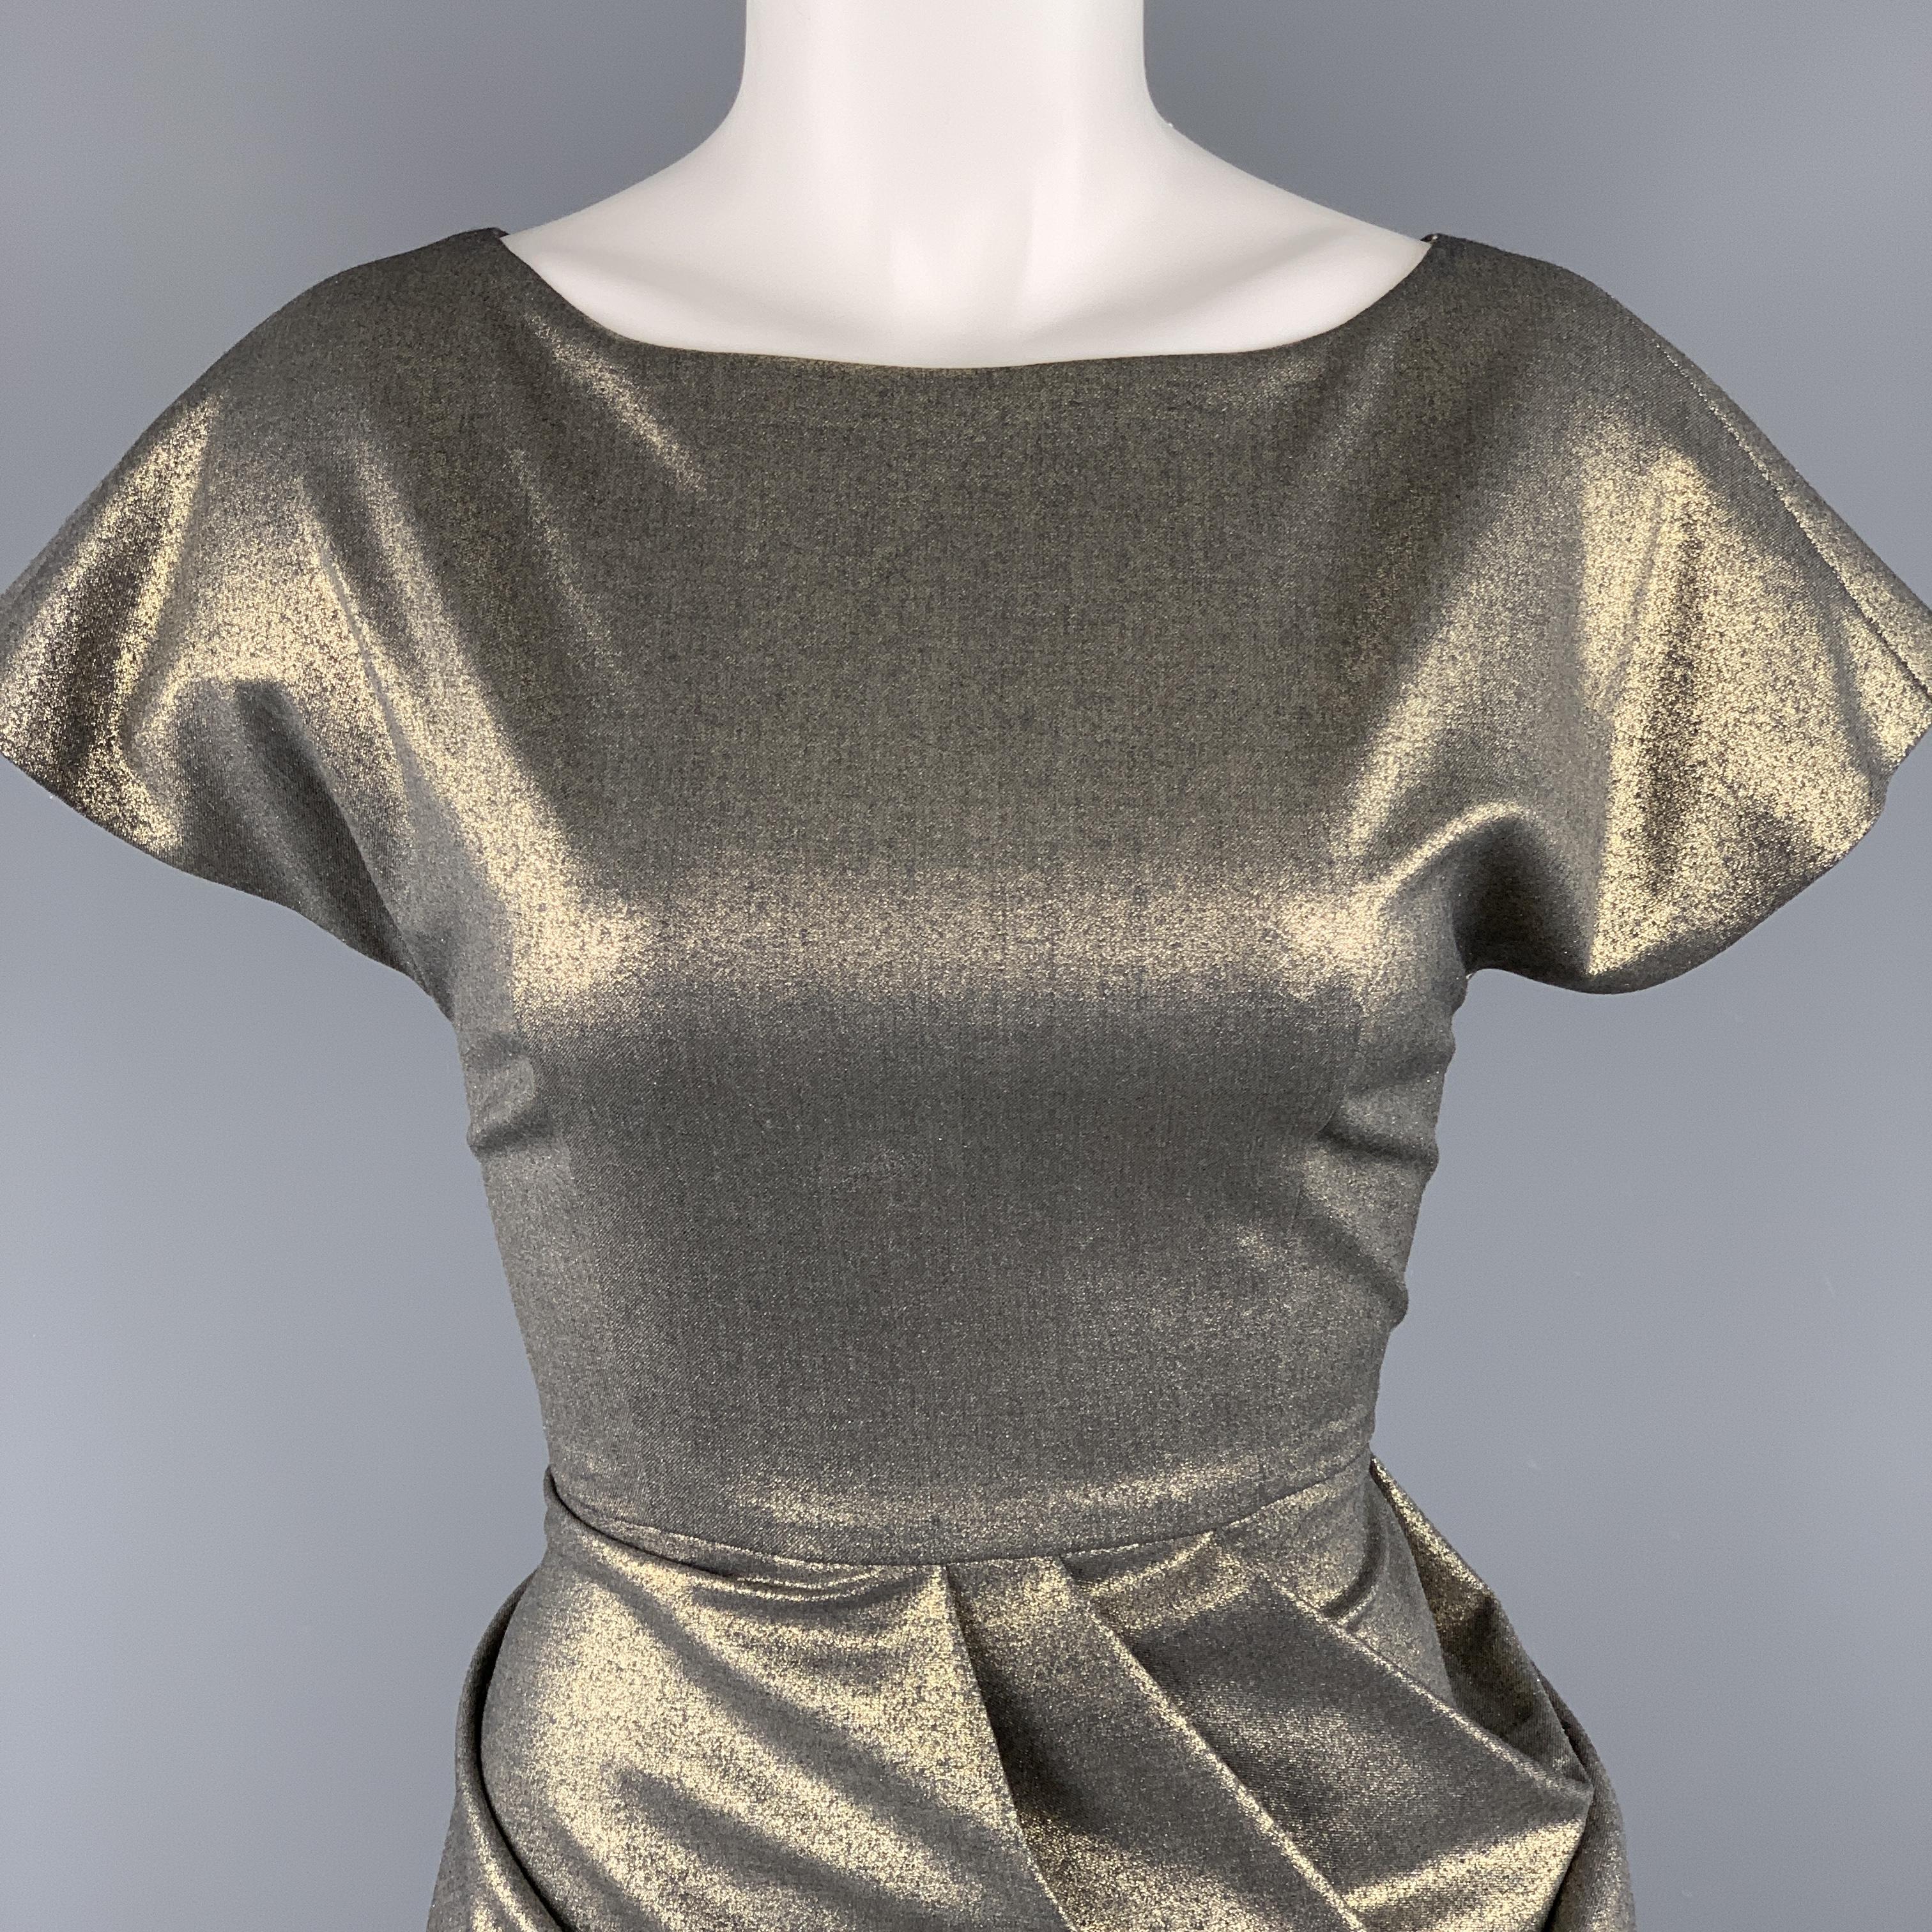 DOMENICO VACCA dress comes in metallic gold coated fabric with a boat neck, cap sleeves, asymmetrical side pleat gathered skirt, and v cut back. 

Excellent Pre-Owned Condition.
Marked: EU 40

Measurements:

Bust: 32 in. in.
Waist: 26 in.
Hip: 34